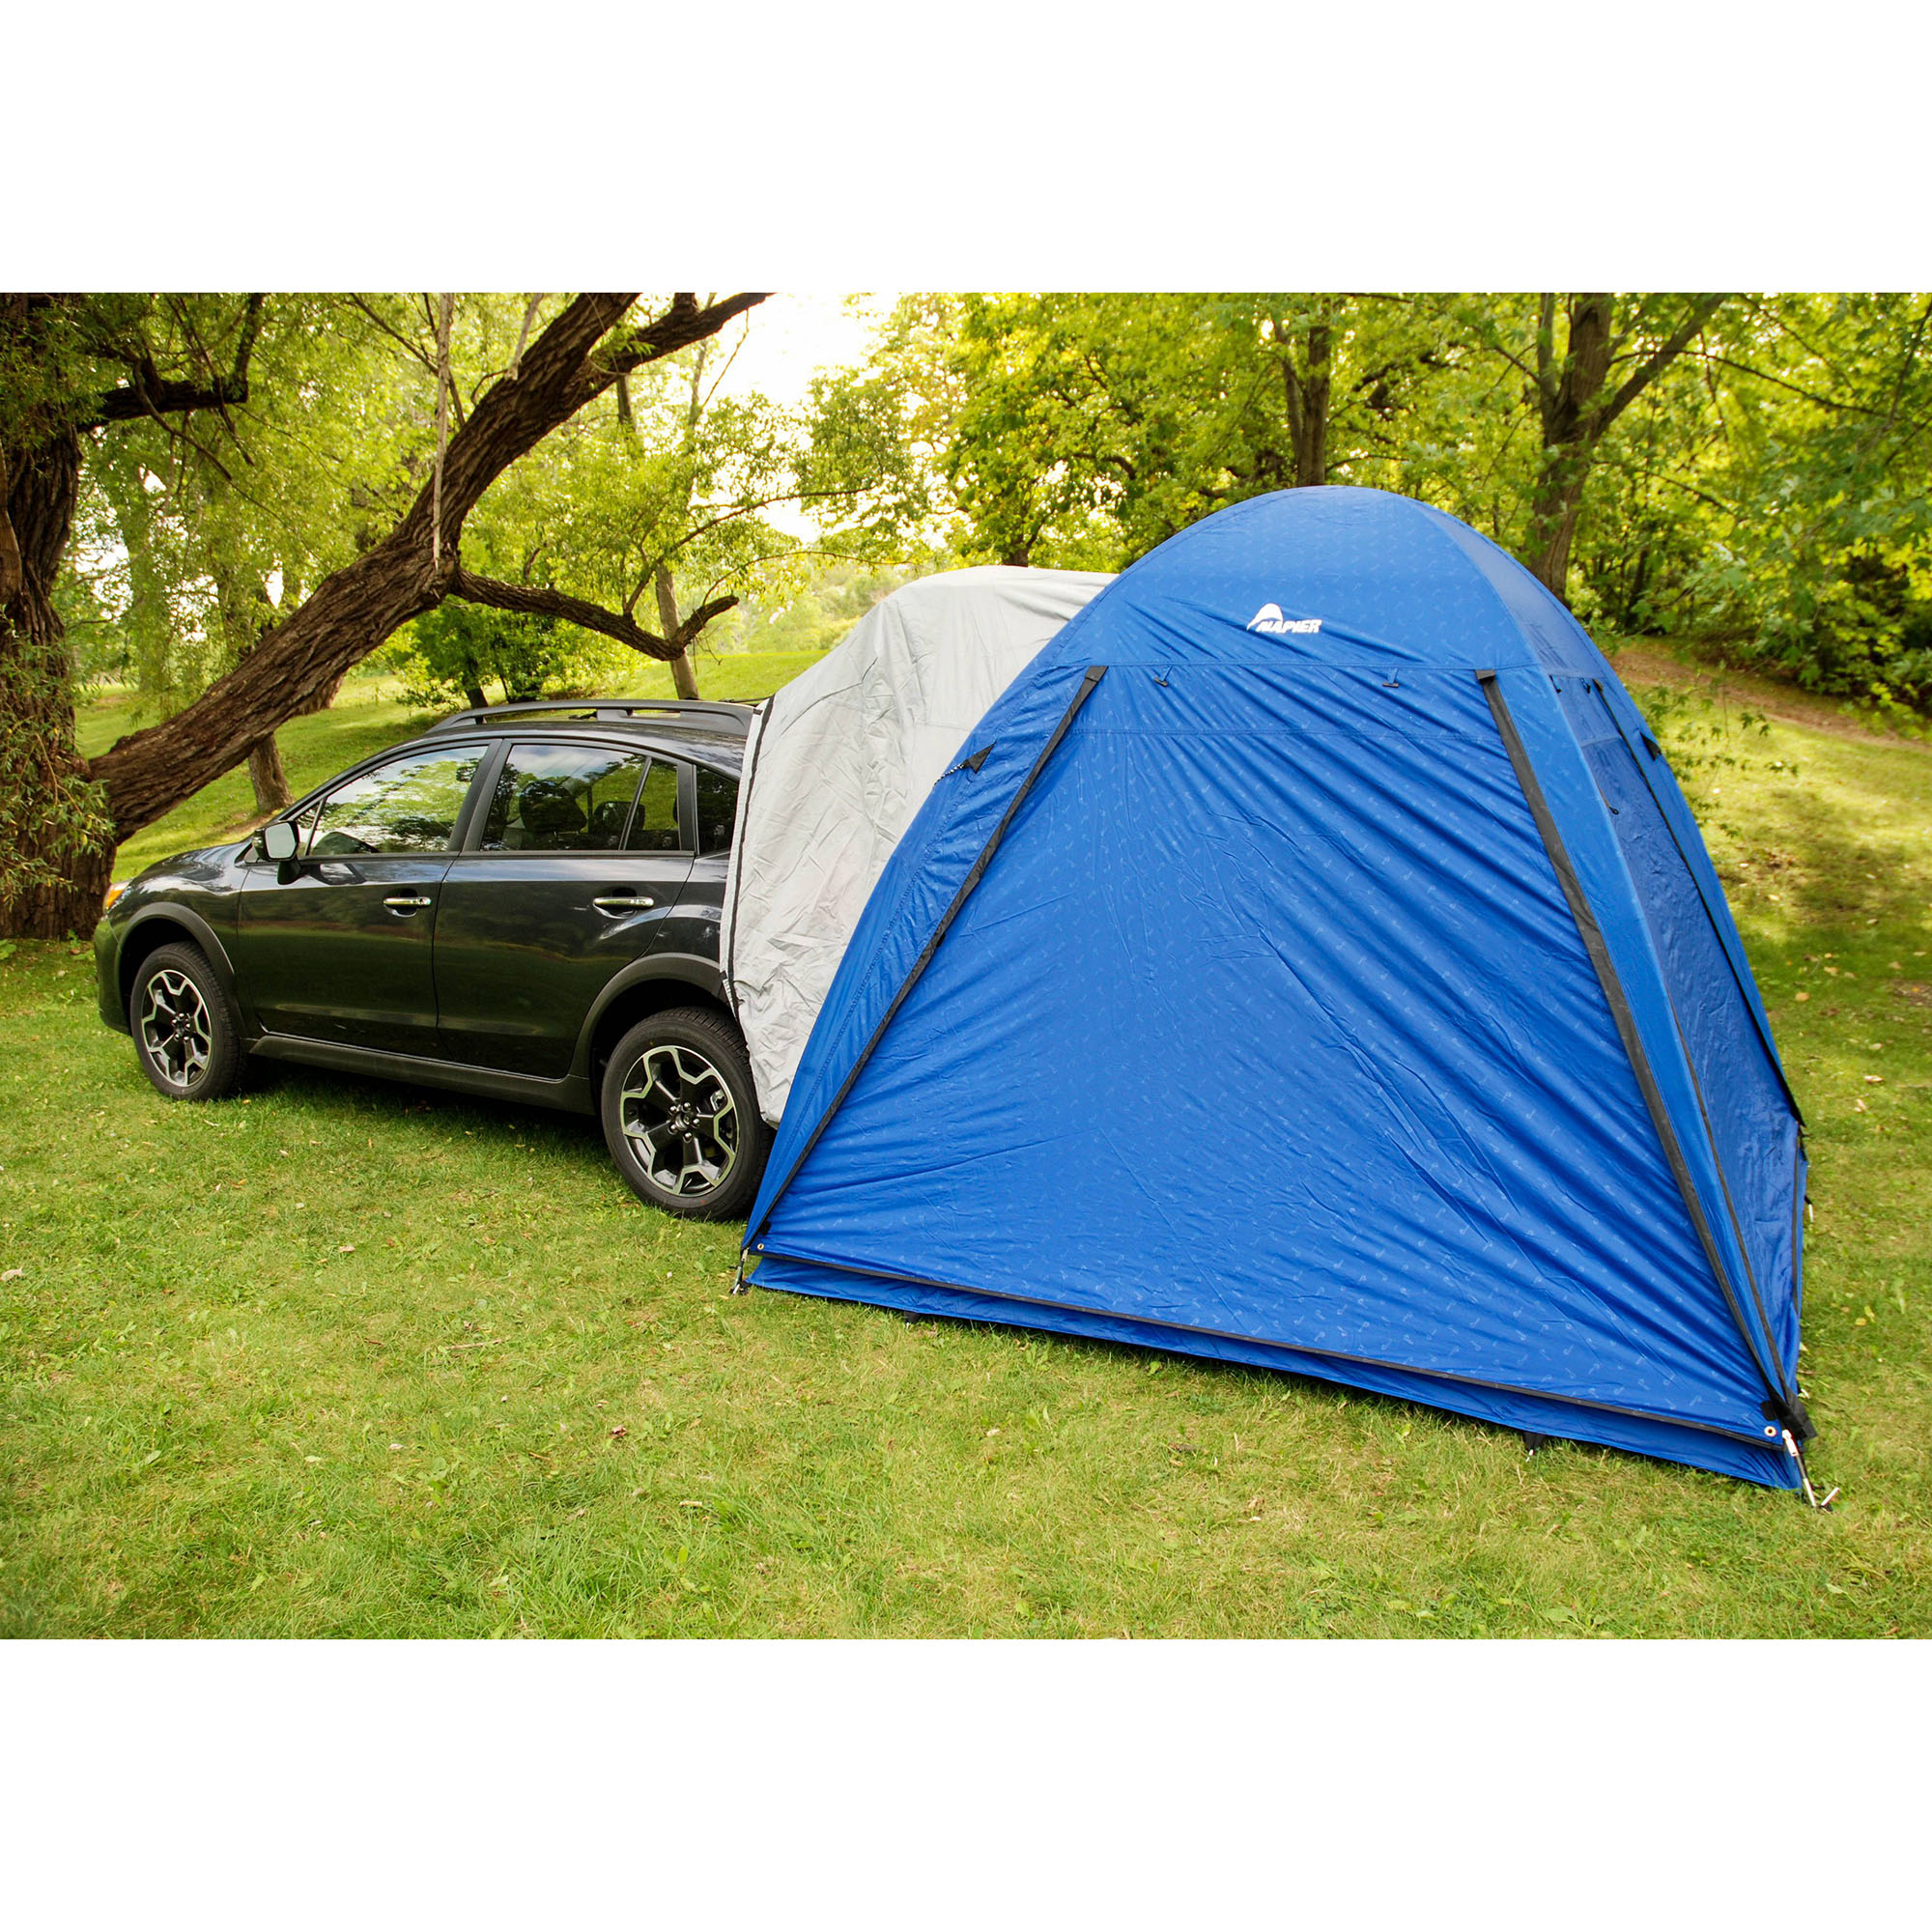 Napier Sportz Dome-To-Go Universal SUV Cargo 4 Person Camping Tent with Awning - image 4 of 7